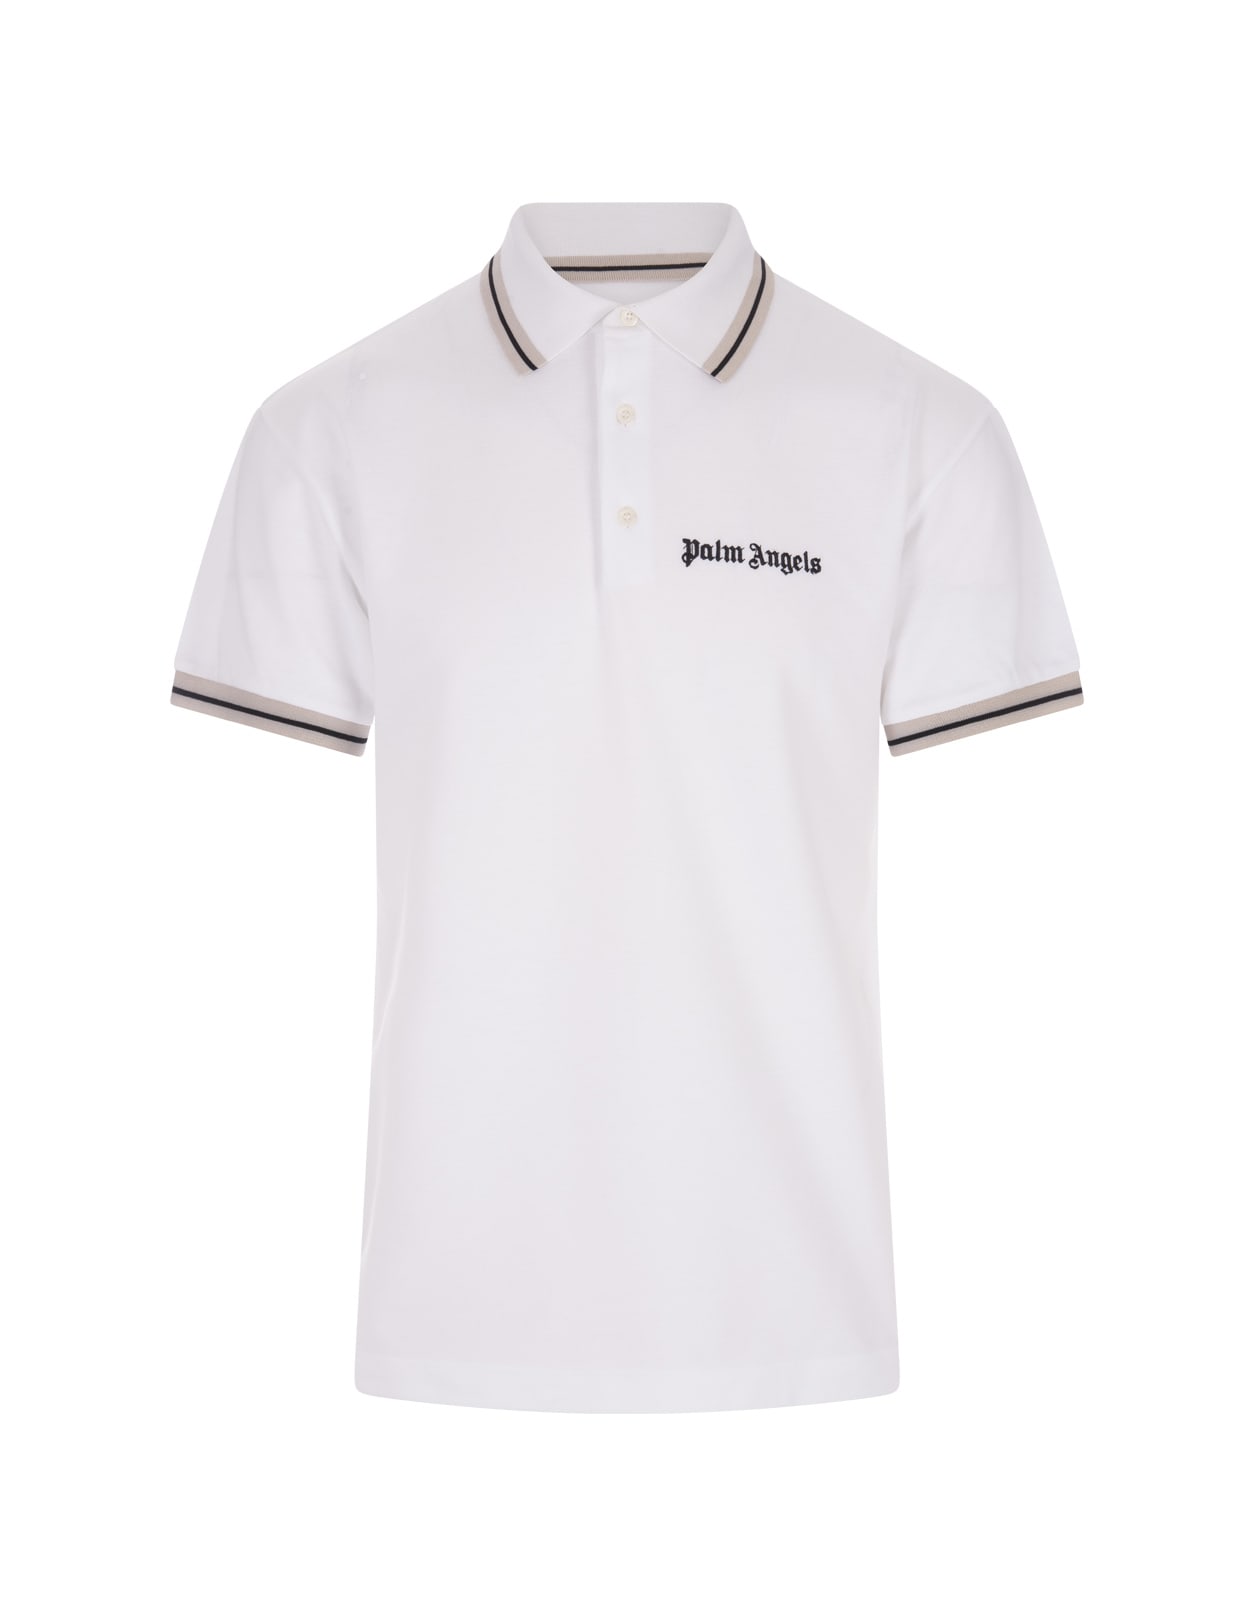 PALM ANGELS WHITE POLO WITH LOGO AND STRIPES